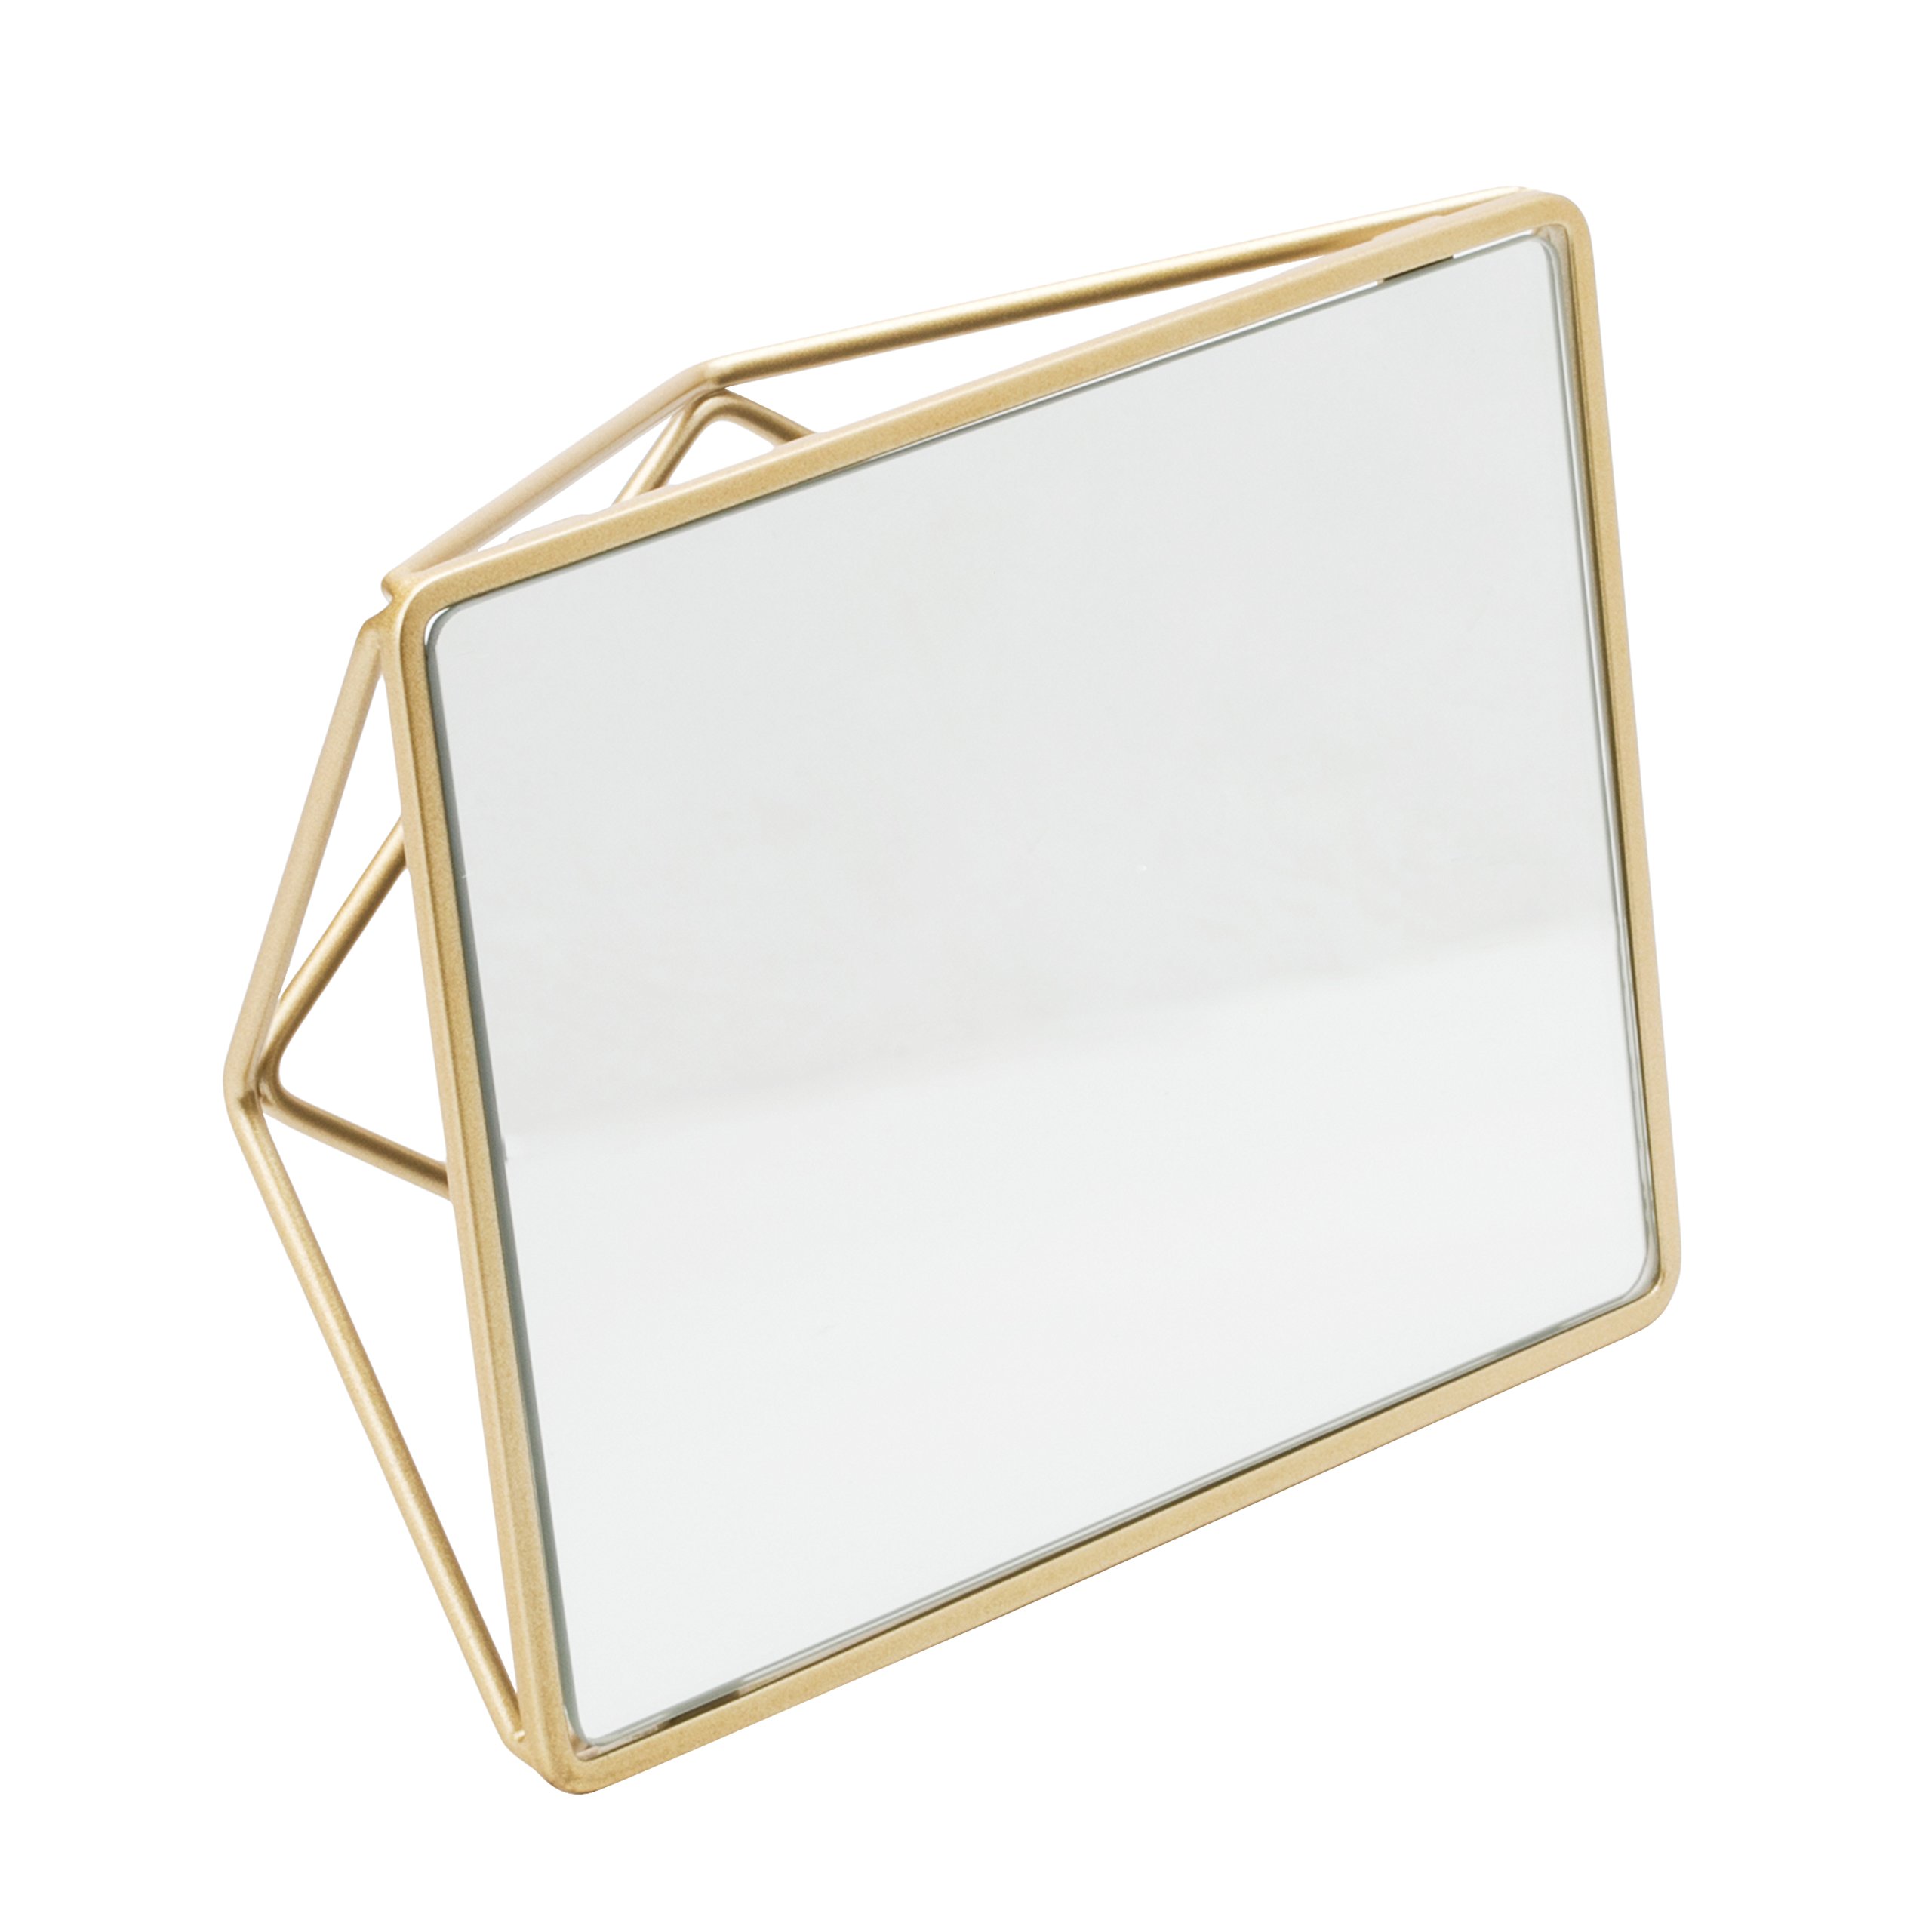 Home Details Free Standing Geometric Vanity Mirror, Horizontal or Vertical, Make-up & Shaving Use, Tabletop, Satin Gold